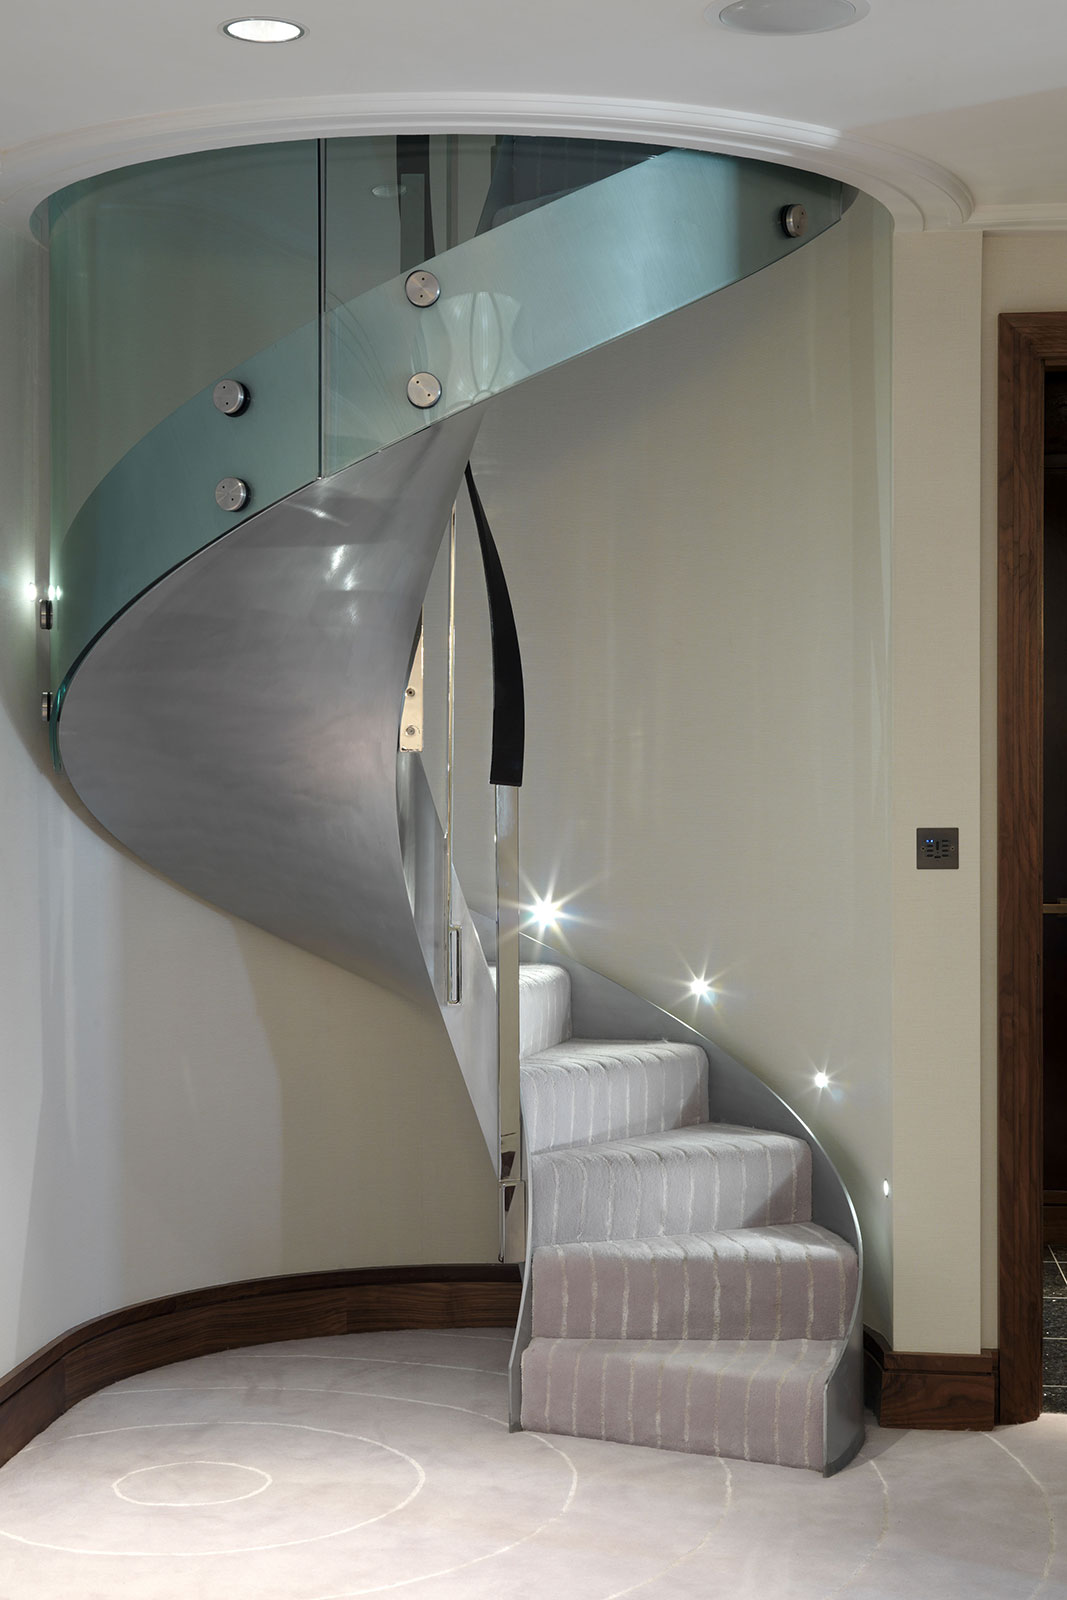 Spiral glass balustrade fixed by glass clip